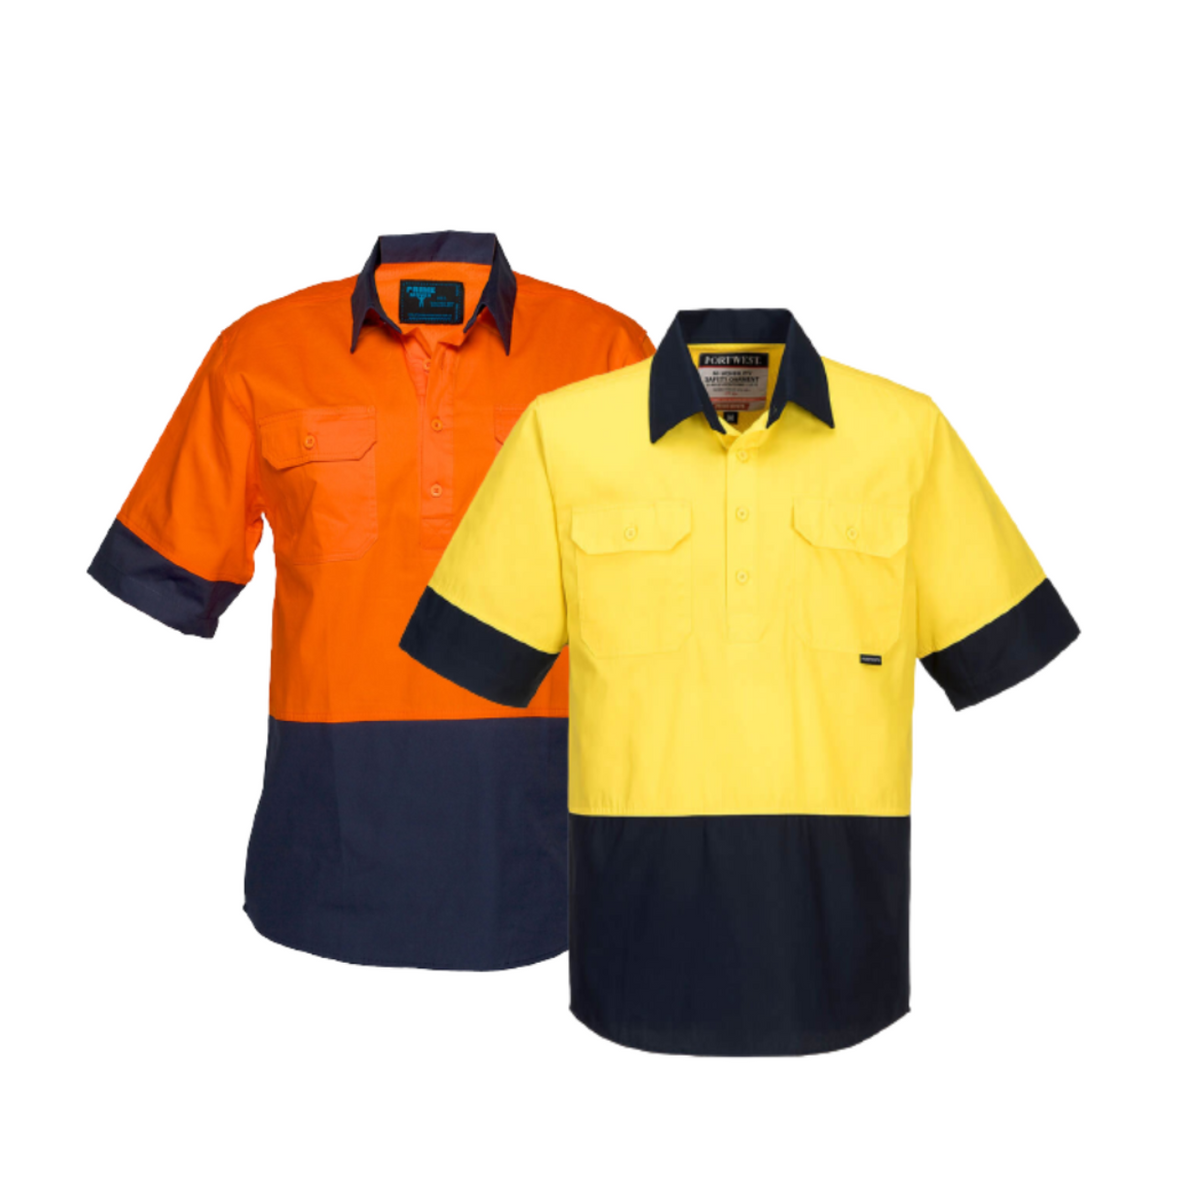 Portwest Hi-Vis Two Tone Lightweight Short Sleeve Closed Front Shirt Wear MC802-Collins Clothing Co